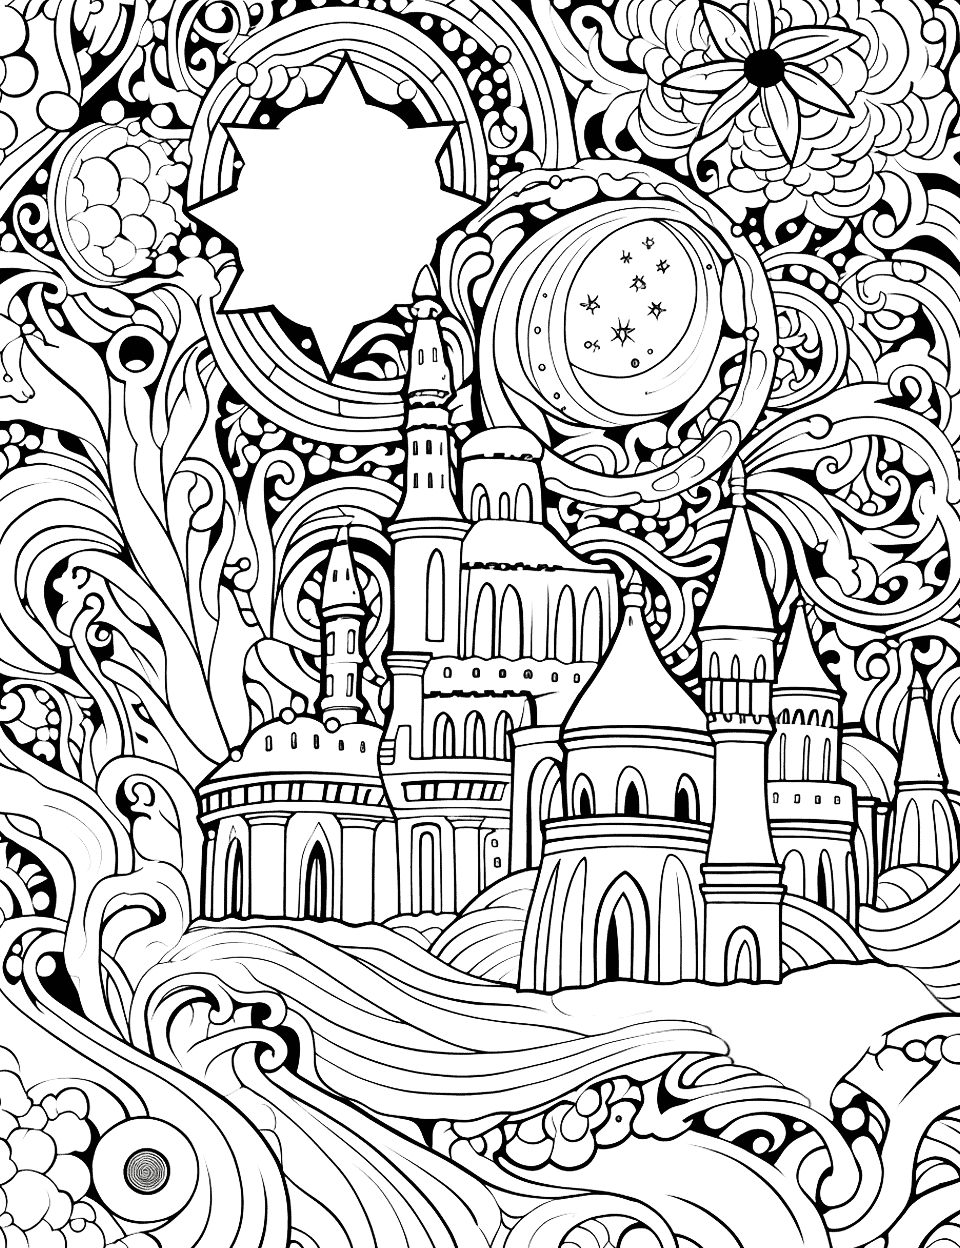 Galaxy Fairy Tale Adult Coloring Page - A detailed fairy tale scene with a galaxy twist.